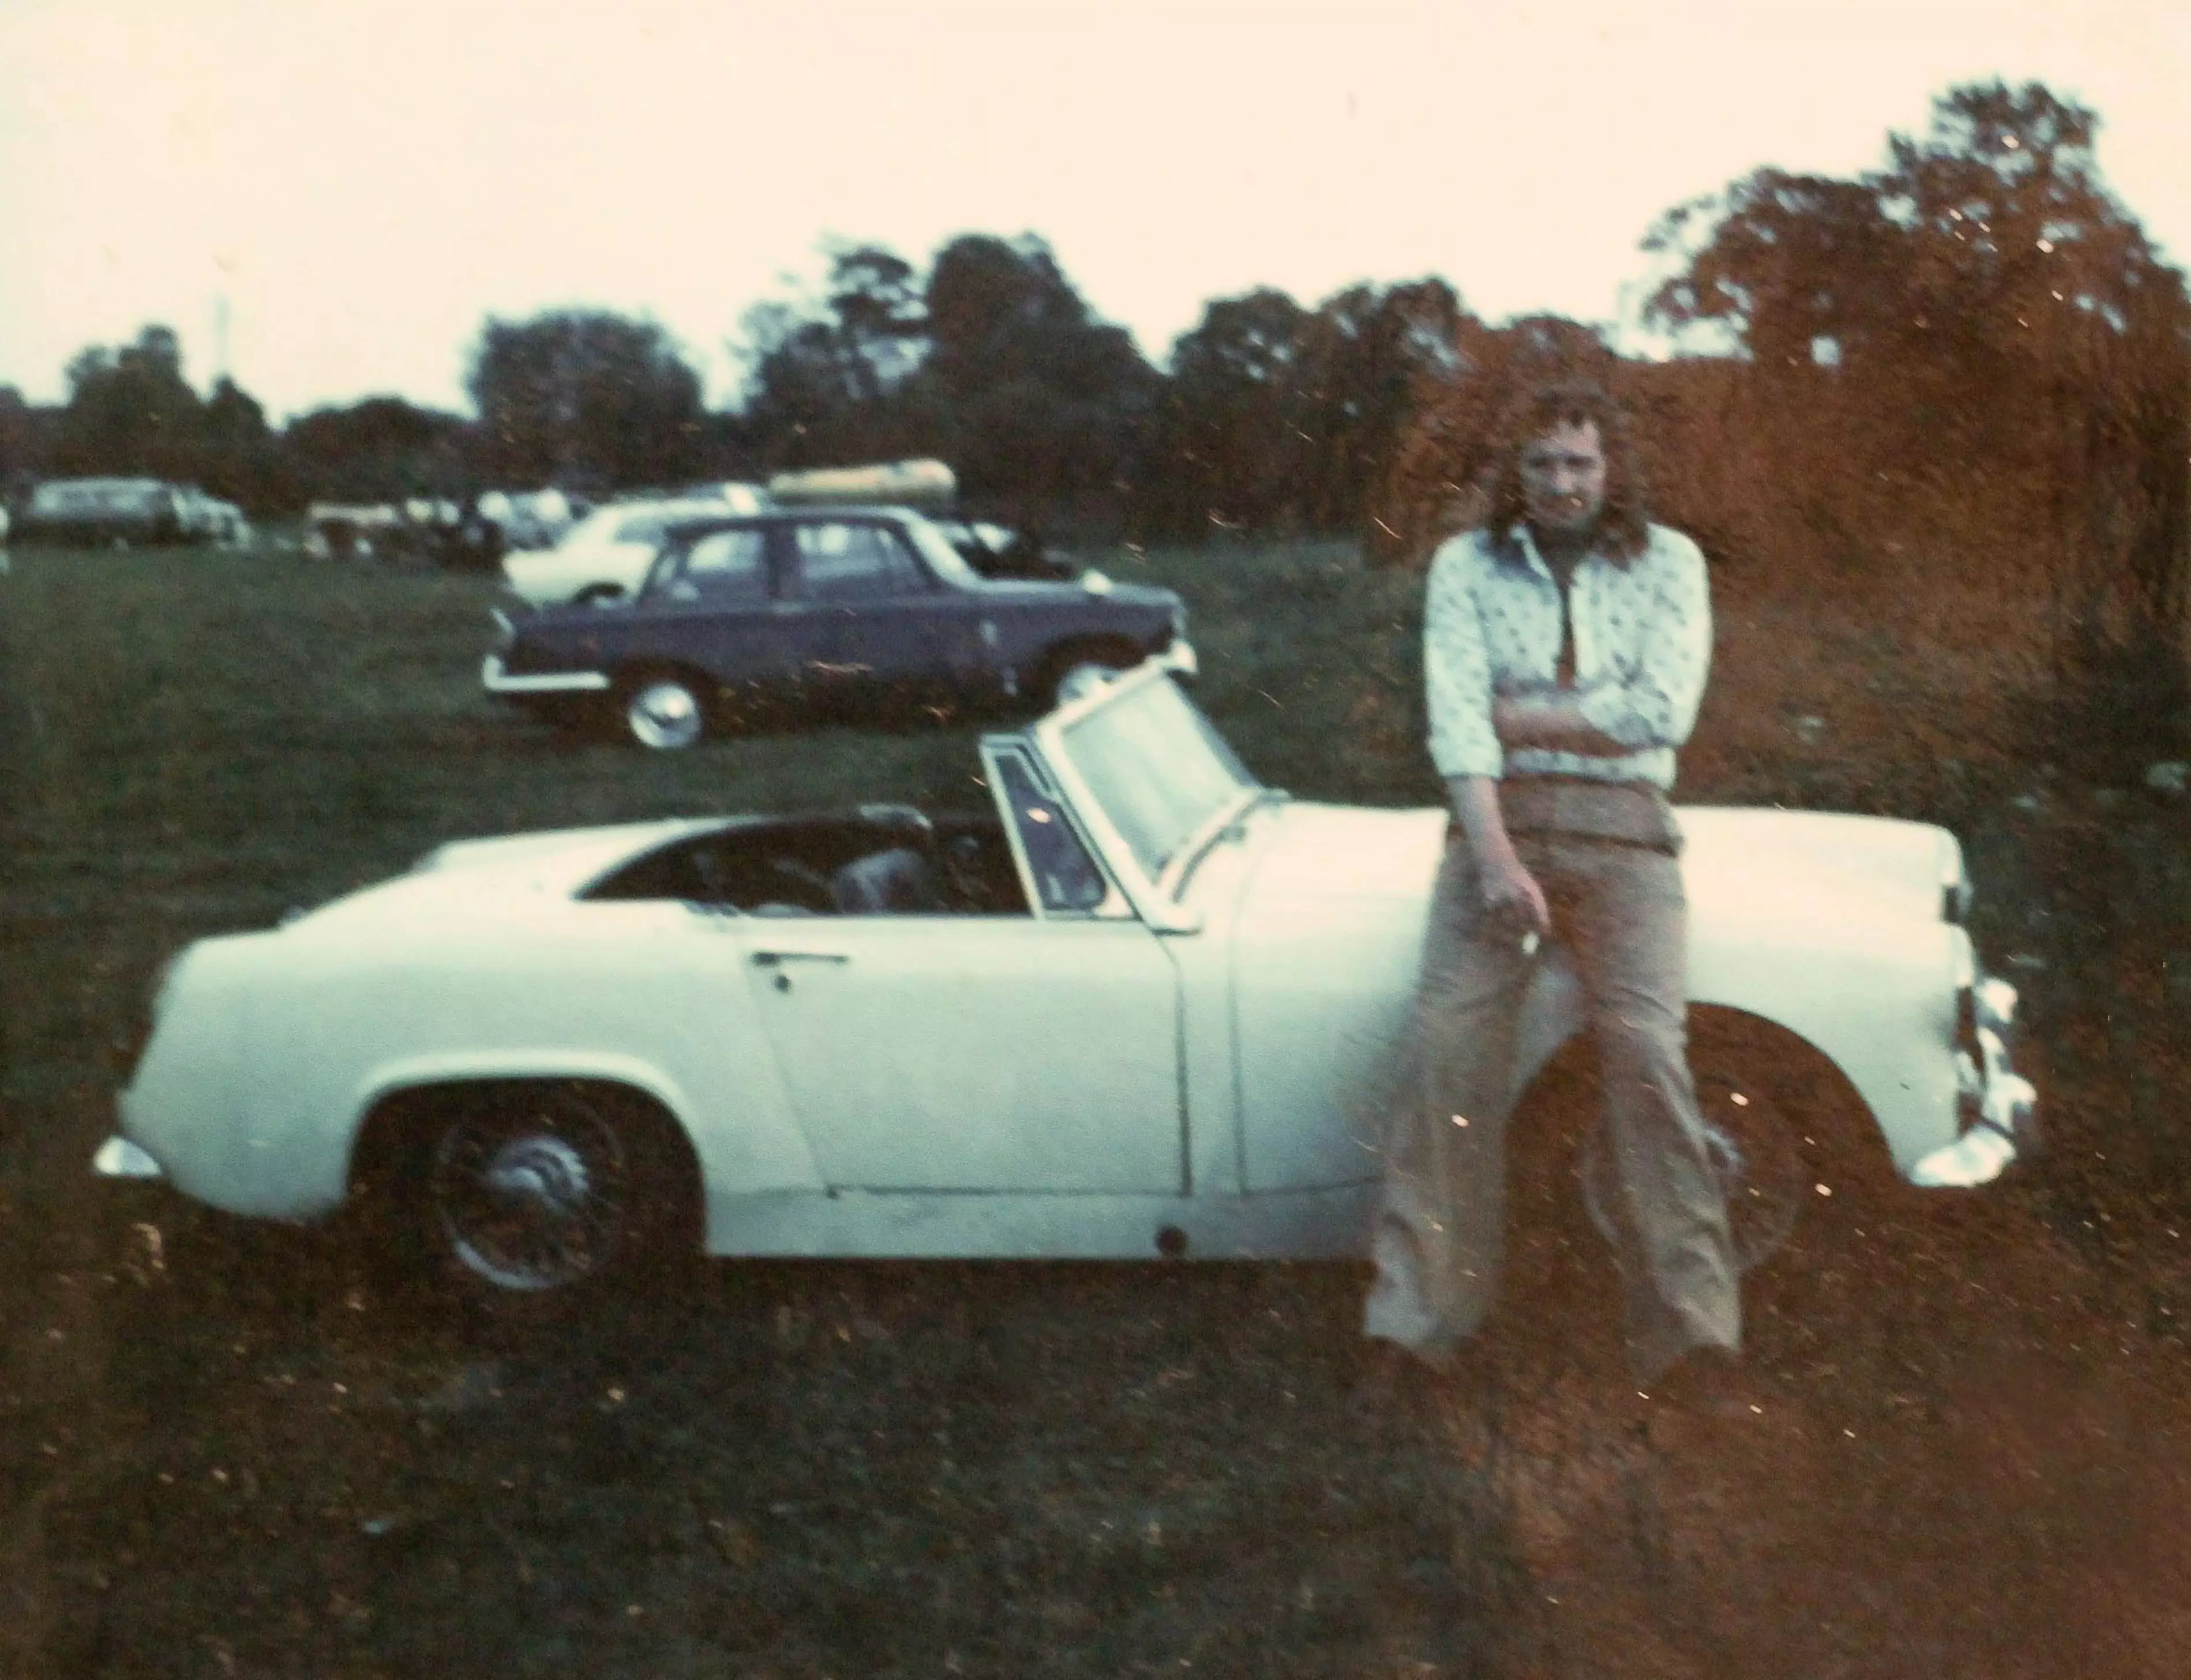 Keith Allies aged 30 at the Pitchcroft fair in the summer of 1974.